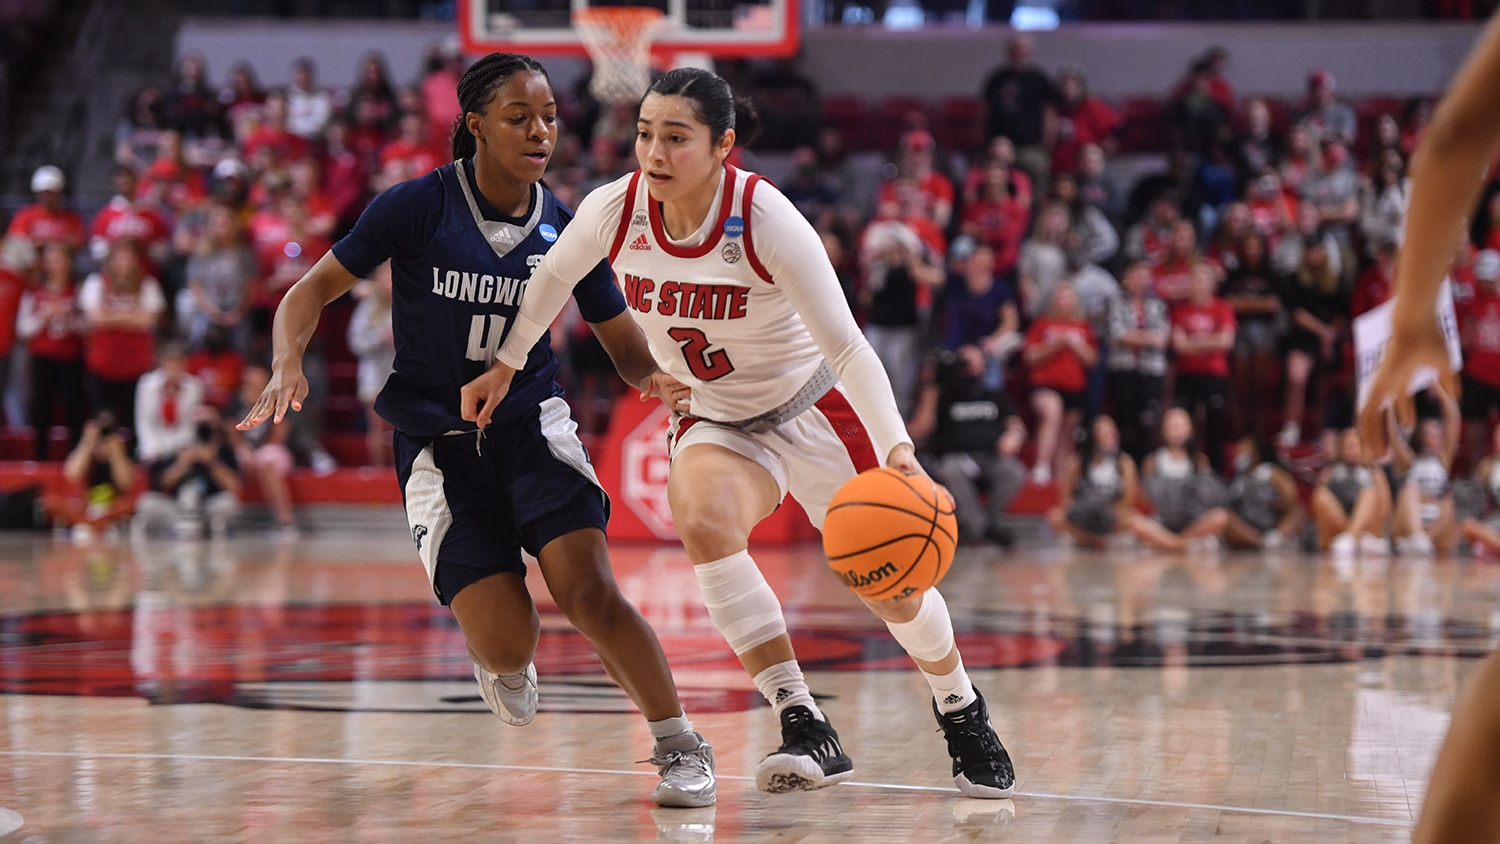 Graduate student Raina Perez drives by a Longwood defender in the first round of the NCAA Championships at Reynolds Coliseum.